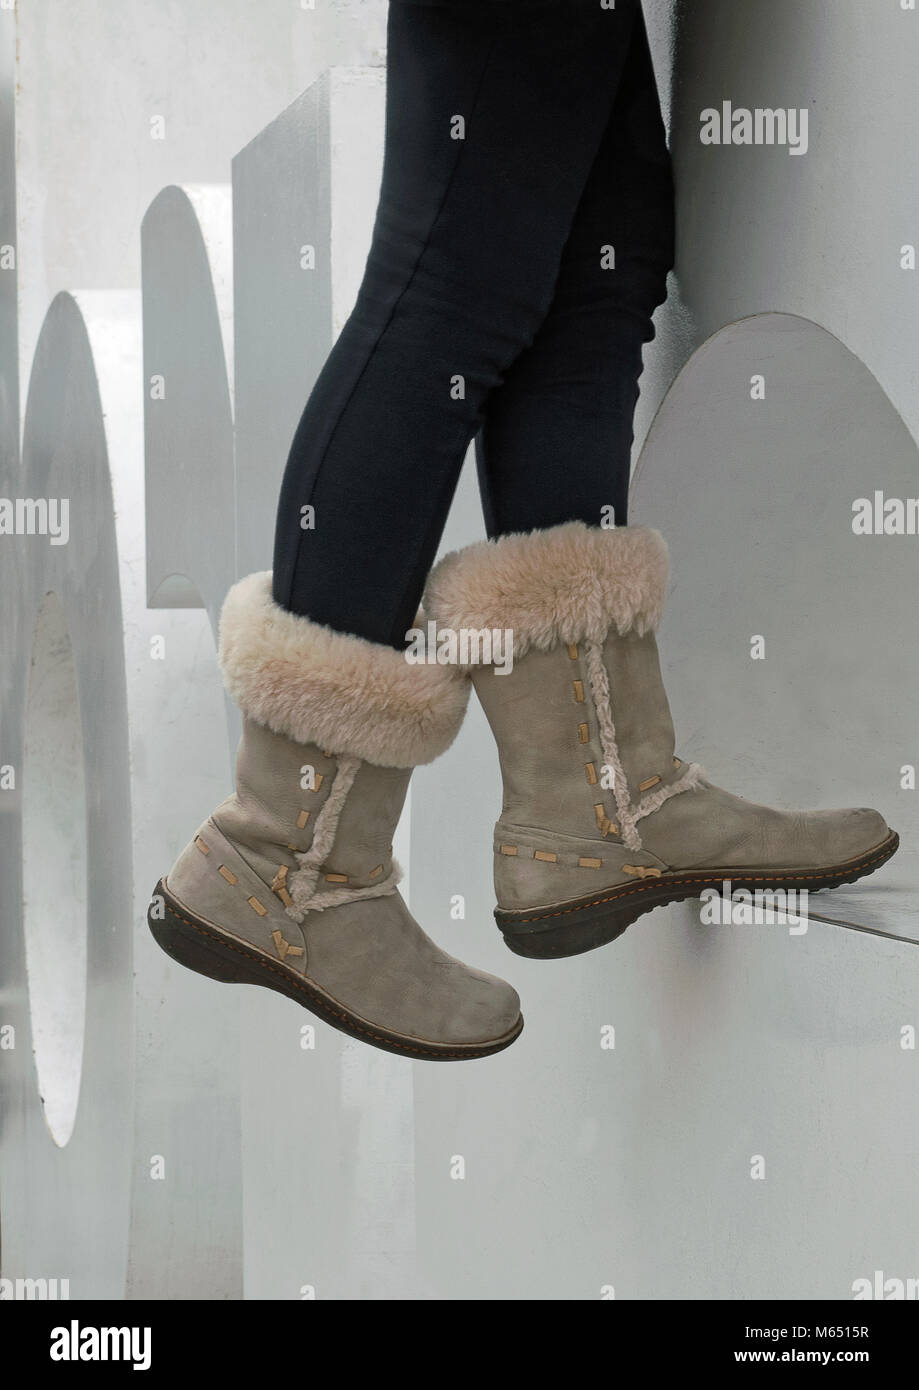 uggs lady boots standing on the i am Amsterdam letters Netherlands Stock  Photo - Alamy